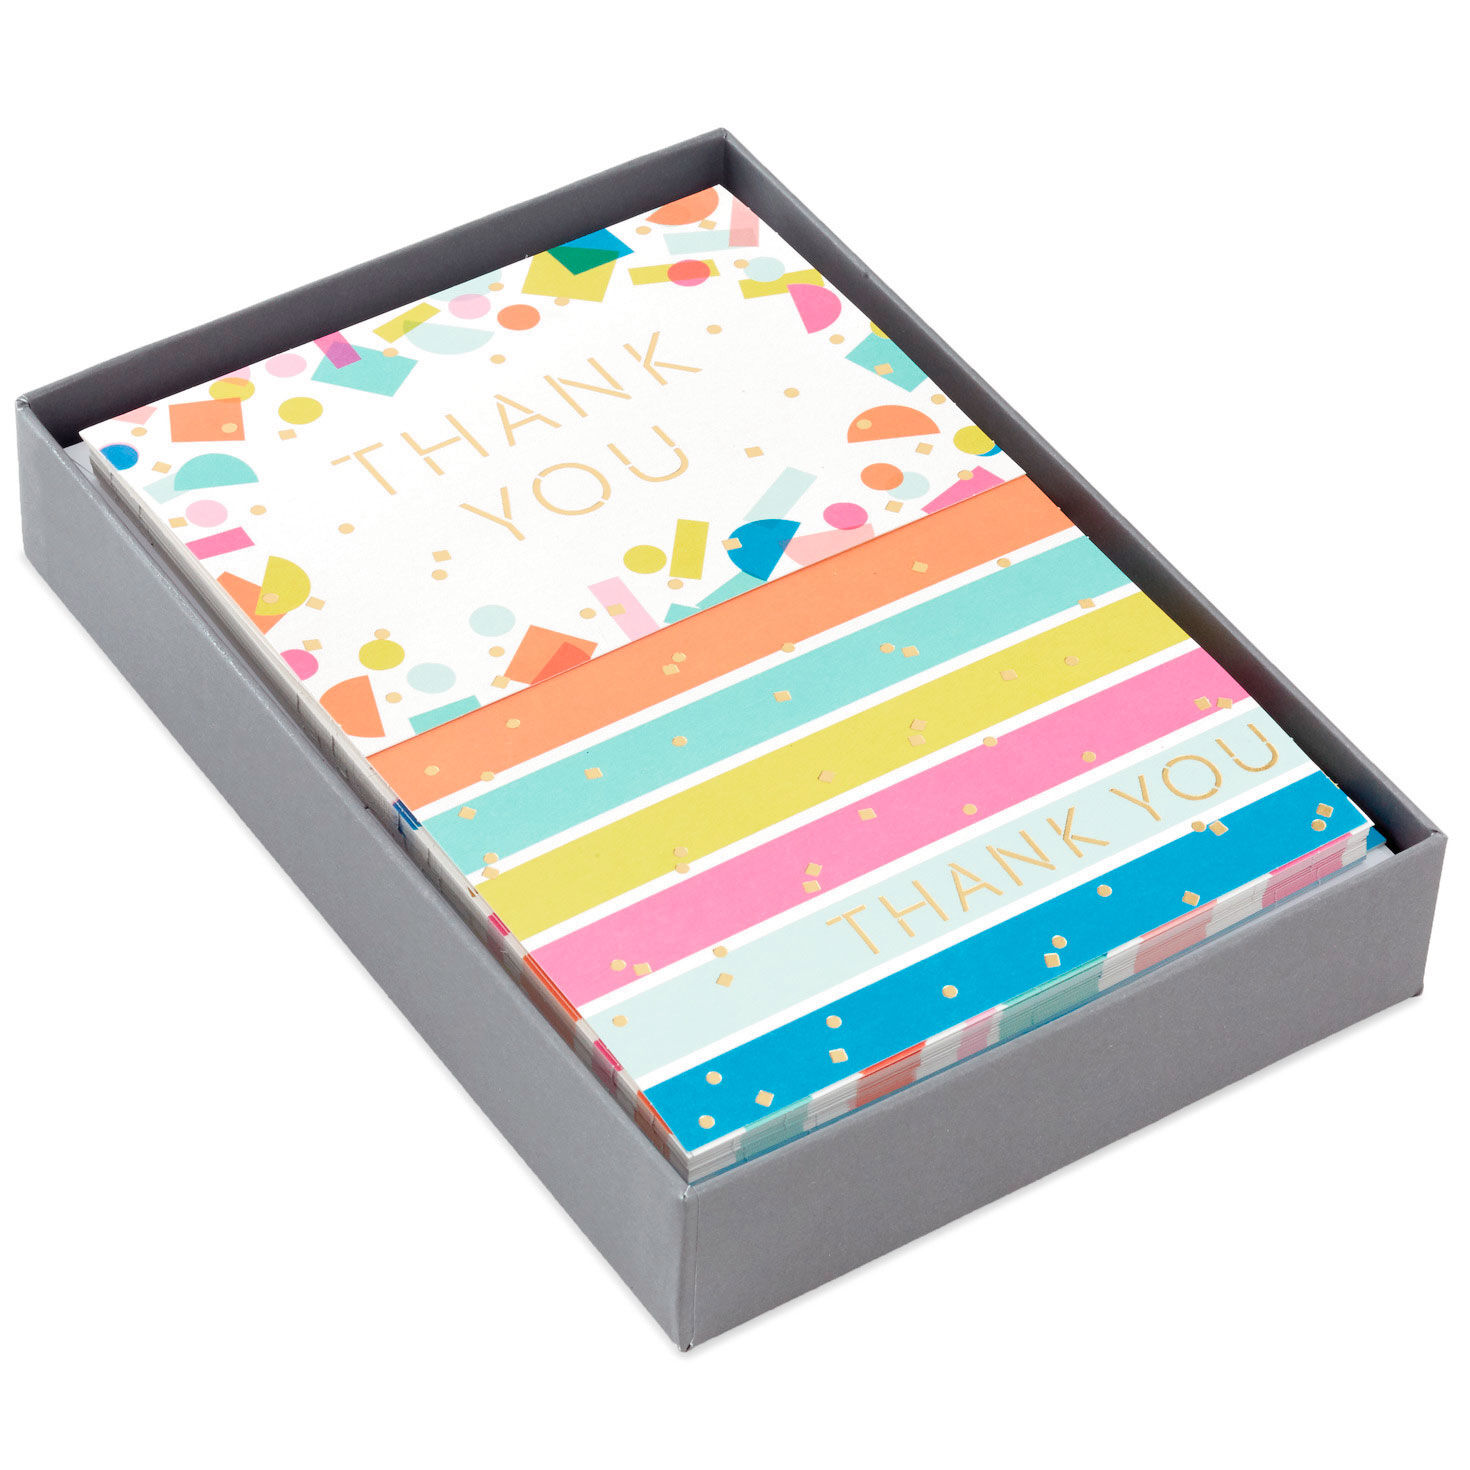 Hallmark Flat Blank Note Cards in Striped Caddy, Assorted Classic Colors,  50 ct.